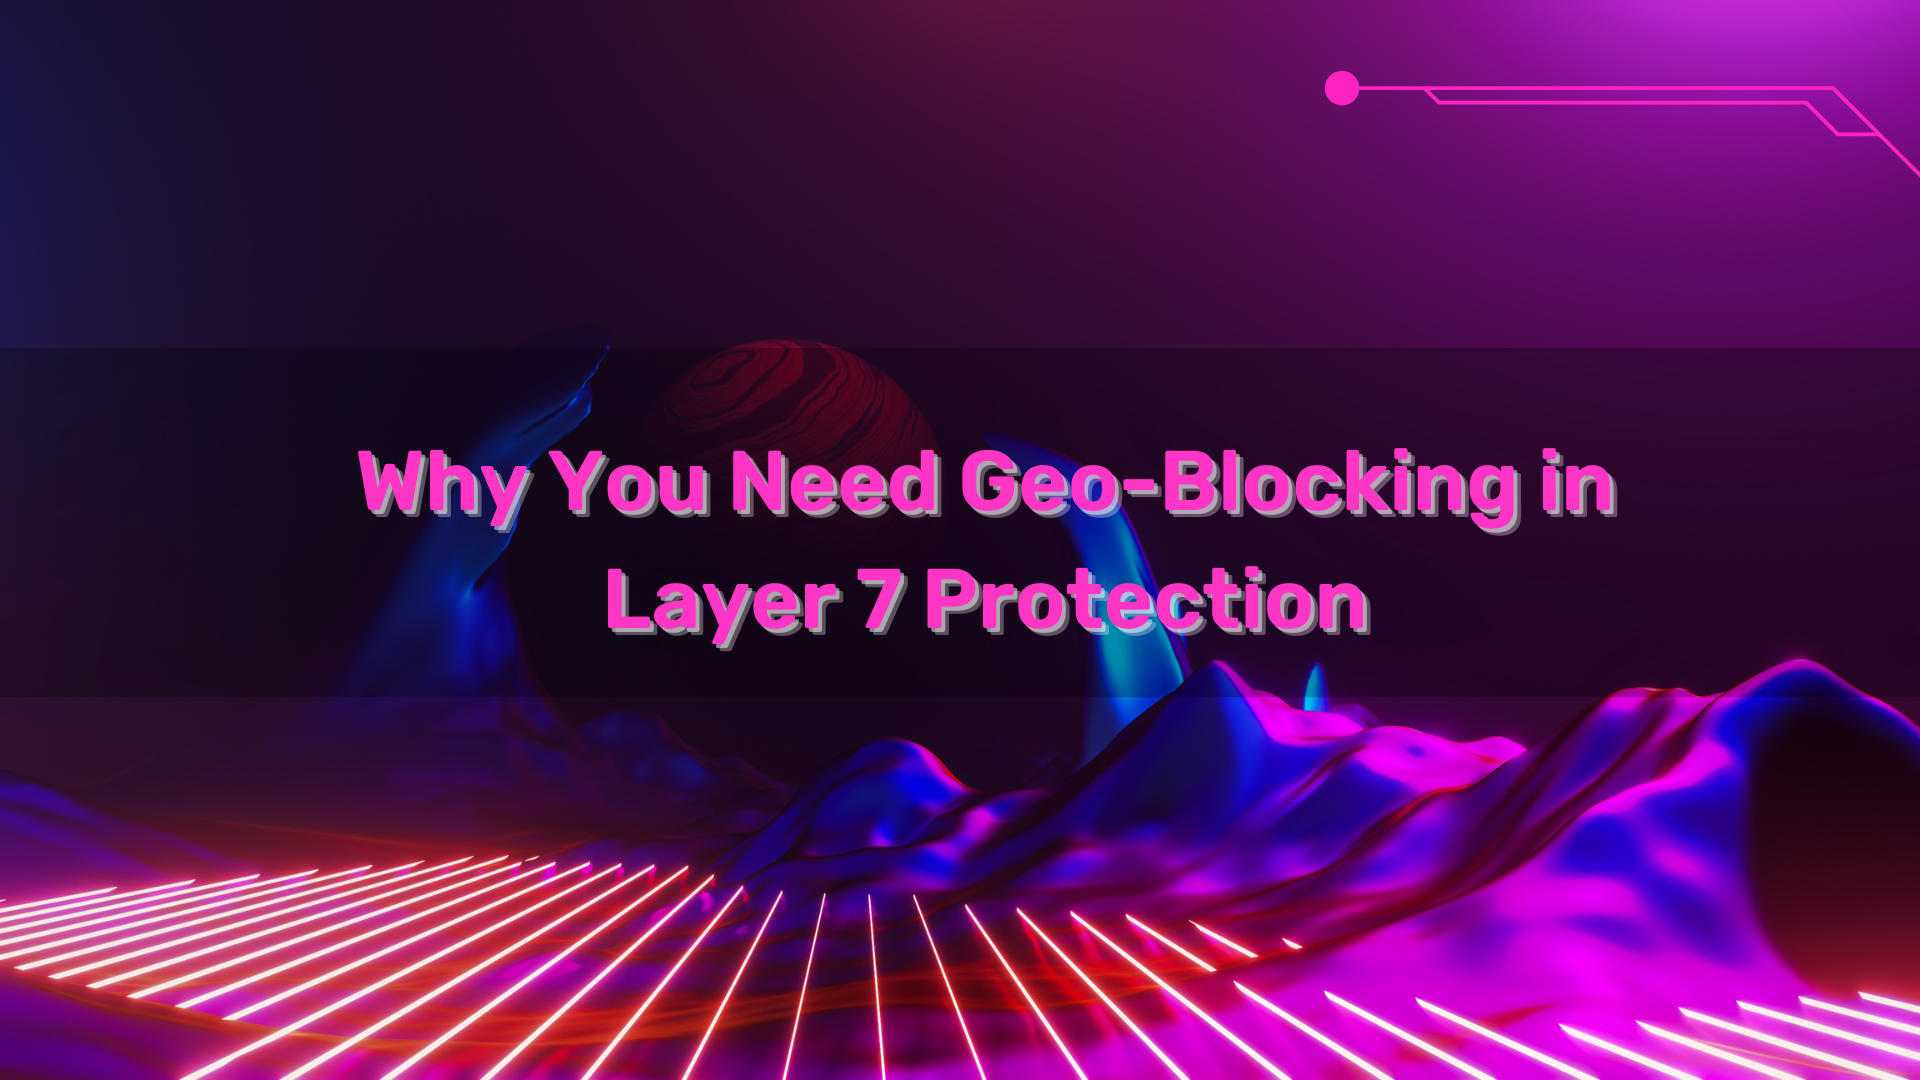 Why You Need Geo-Blocking in Layer 7 Protection